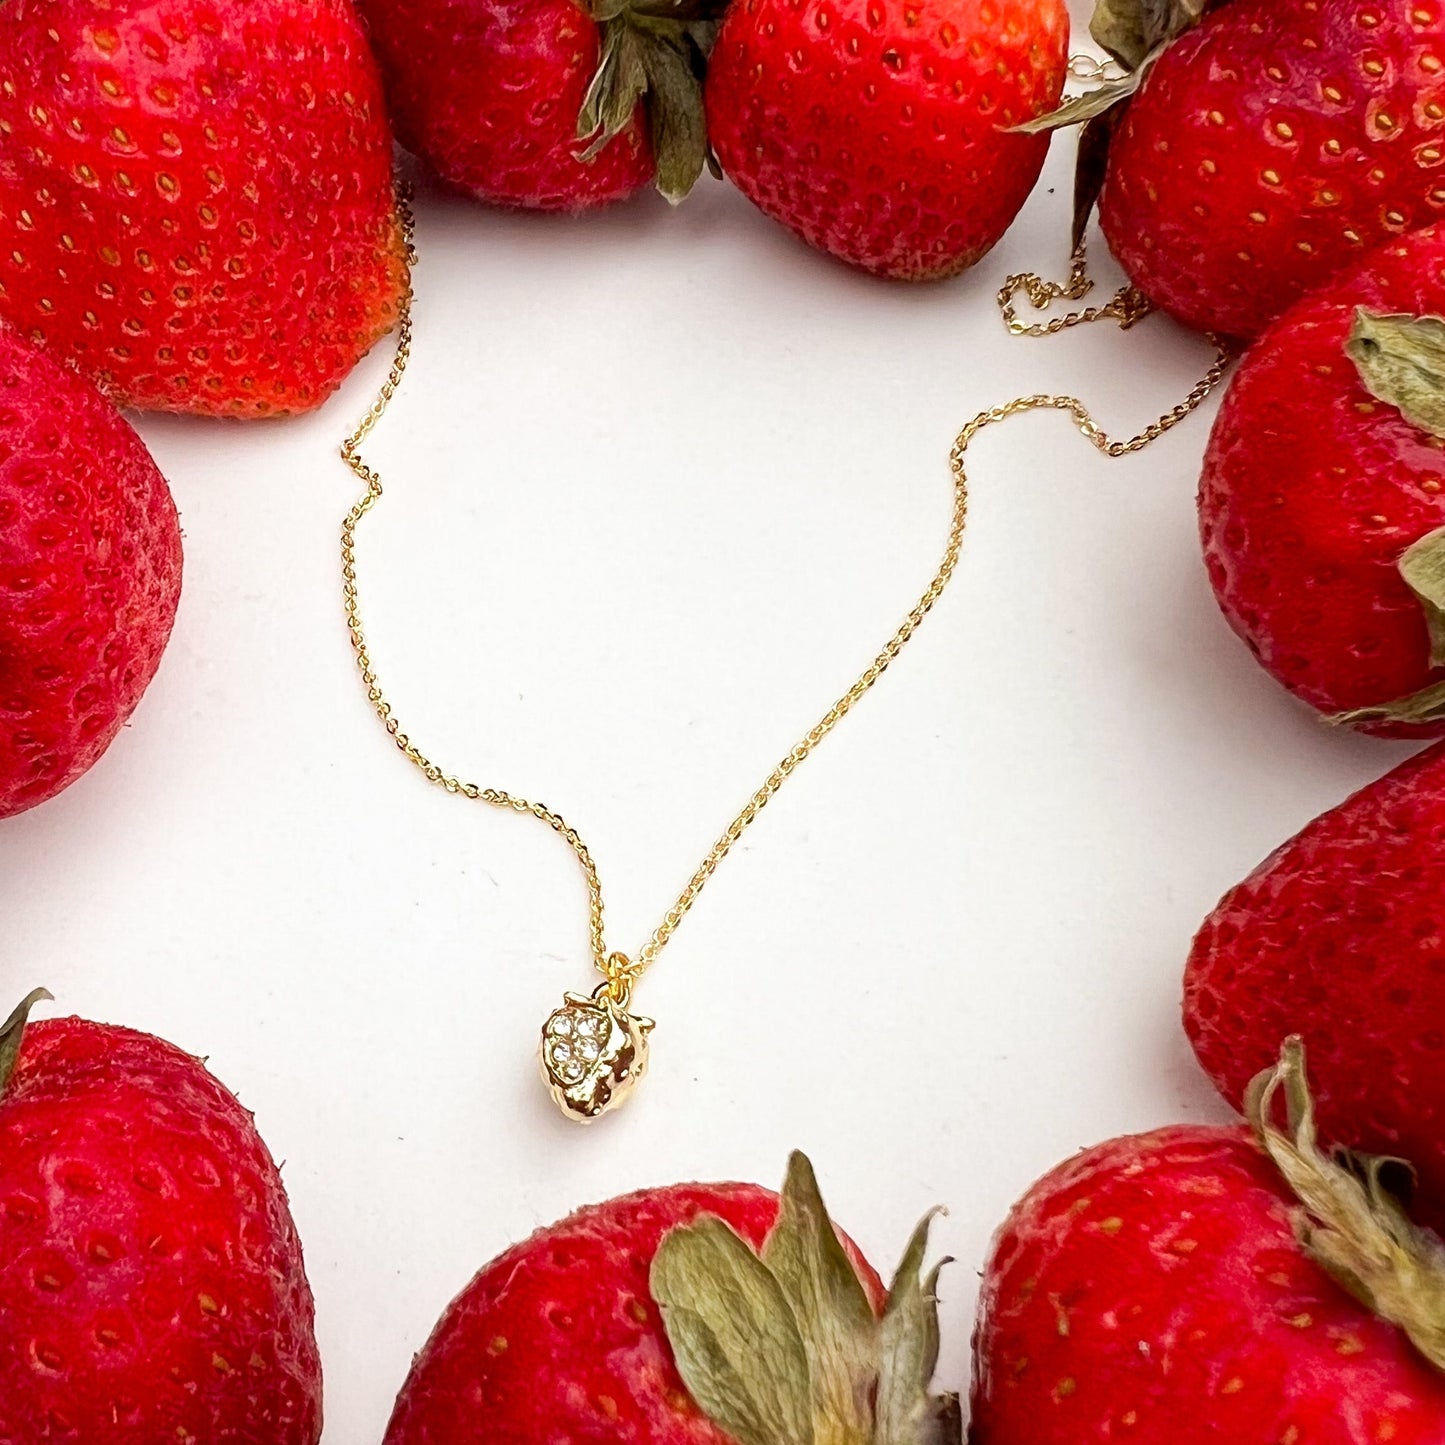 The Strawberry Necklace